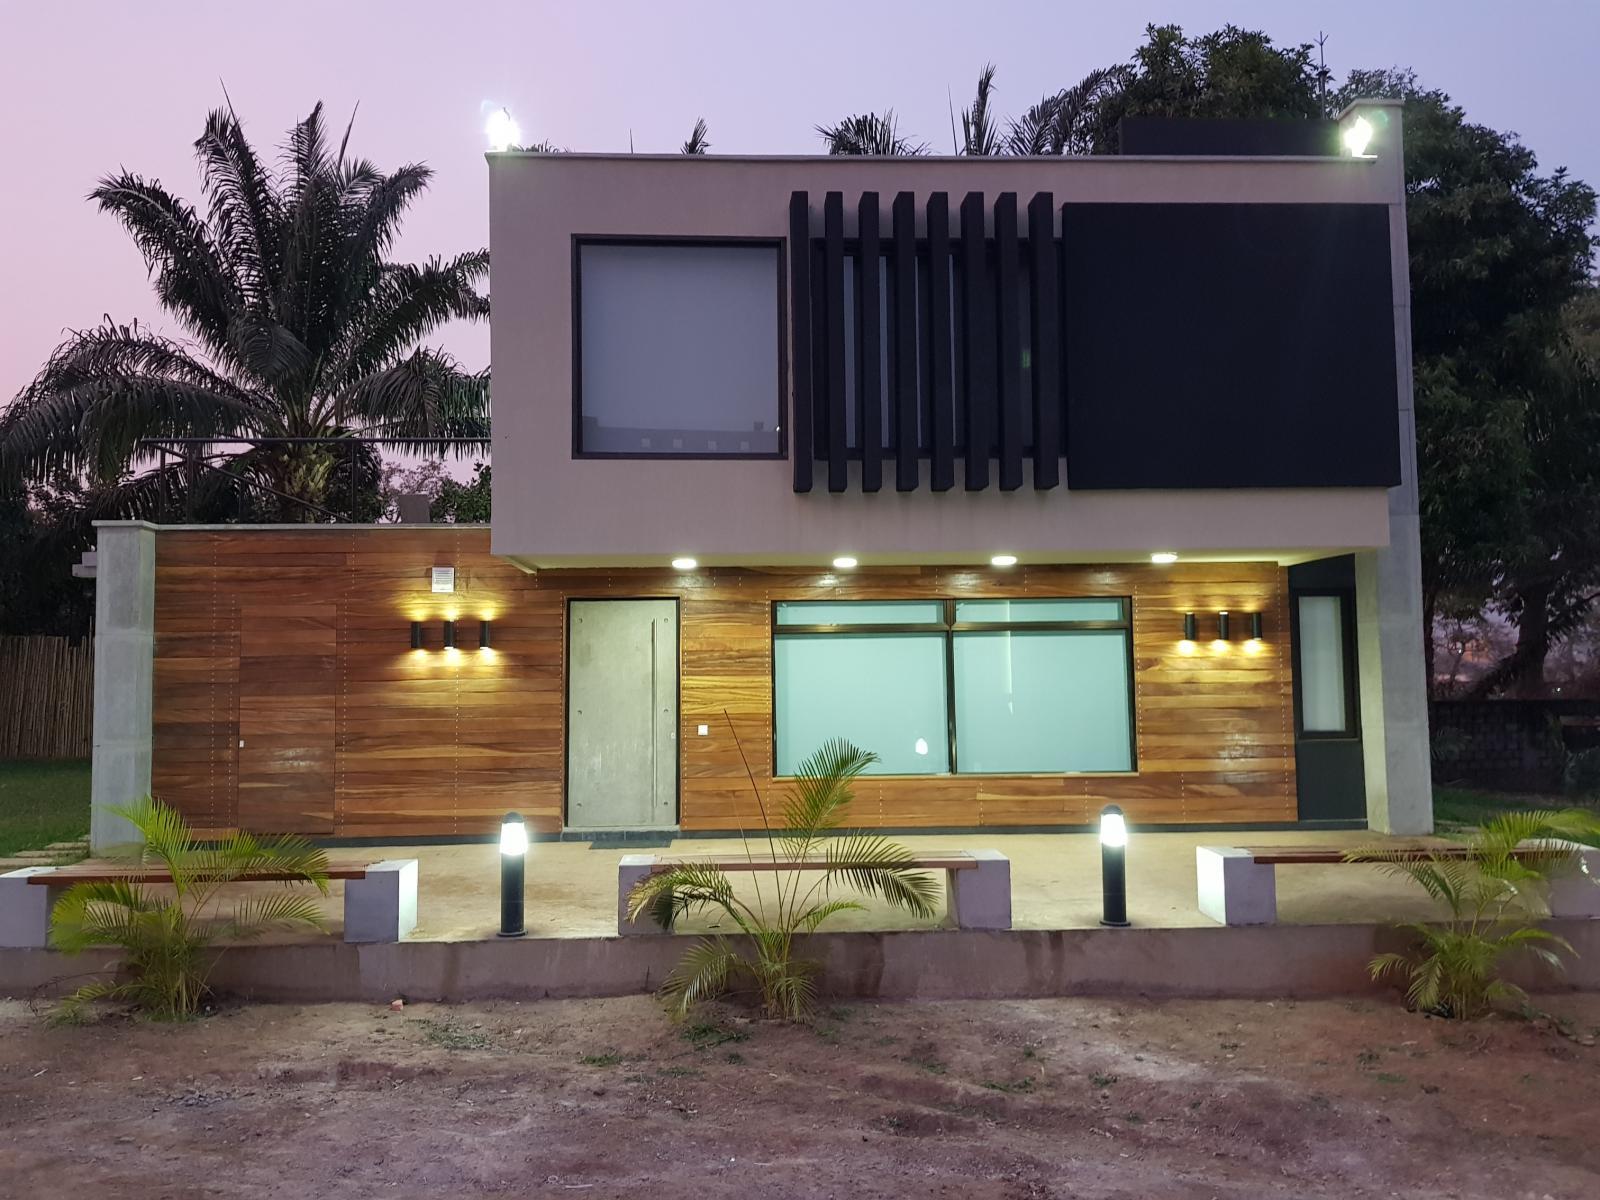 This modern  home  in Abuja was built in just 8 weeks using shipping containers  